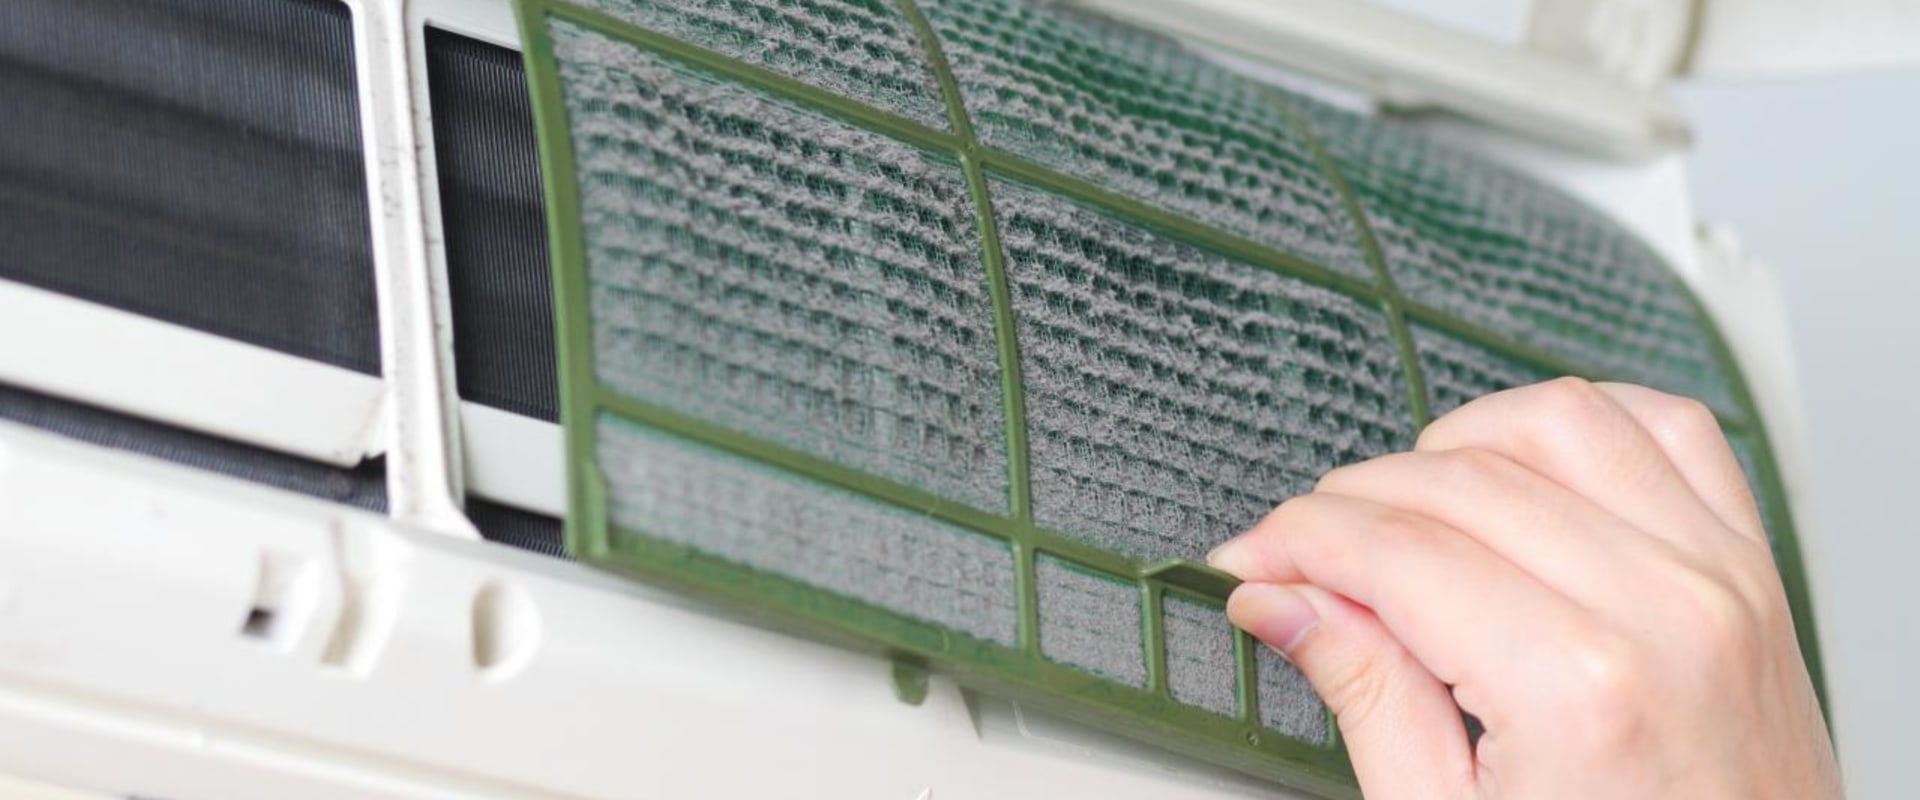 How Often Should You Clean Your AC Filter?